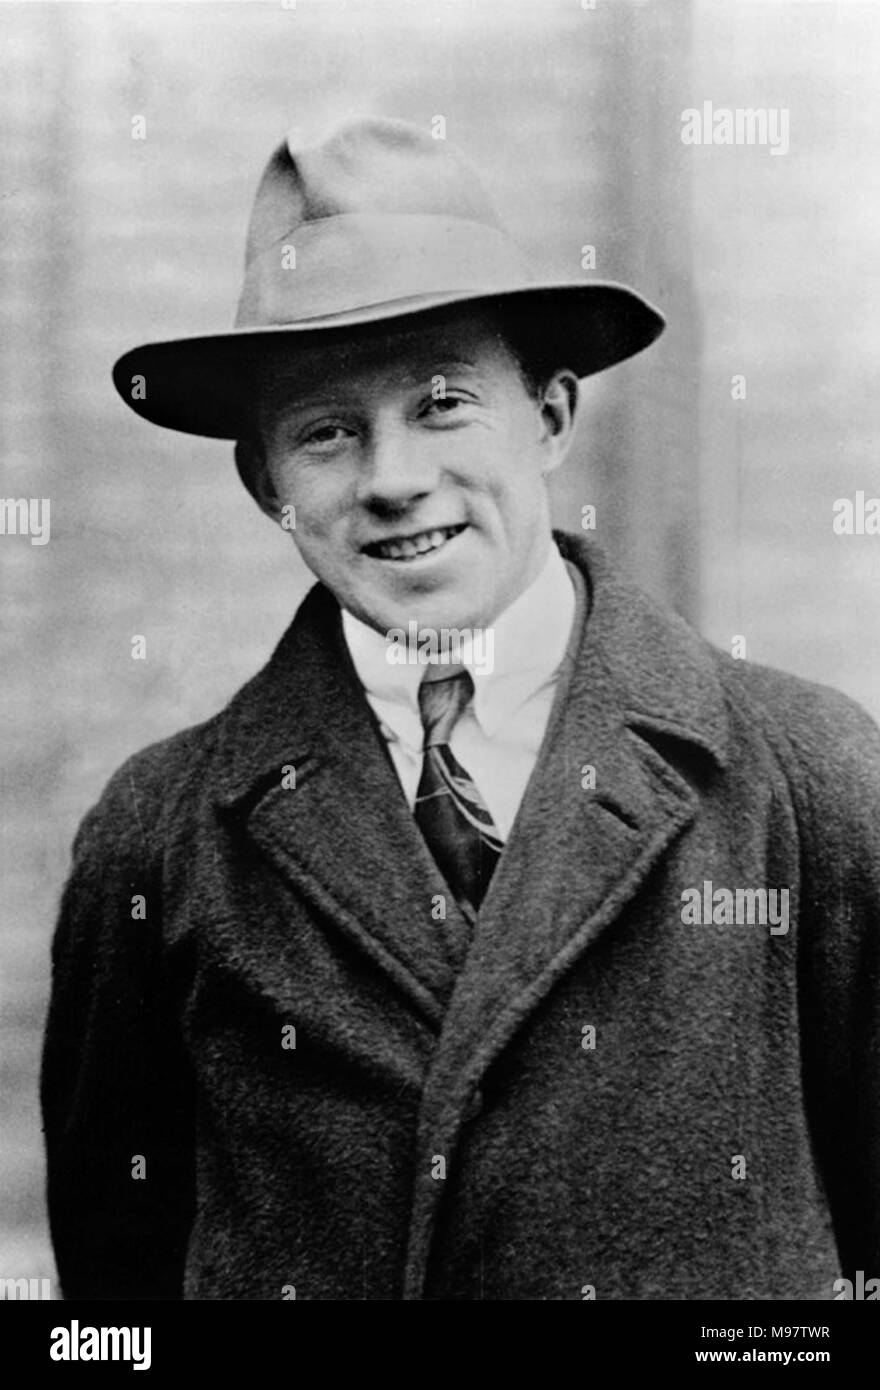 Werner Heisenberg (1901-1976). Portrait of the German theoretical physicist, c.1927. Stock Photo